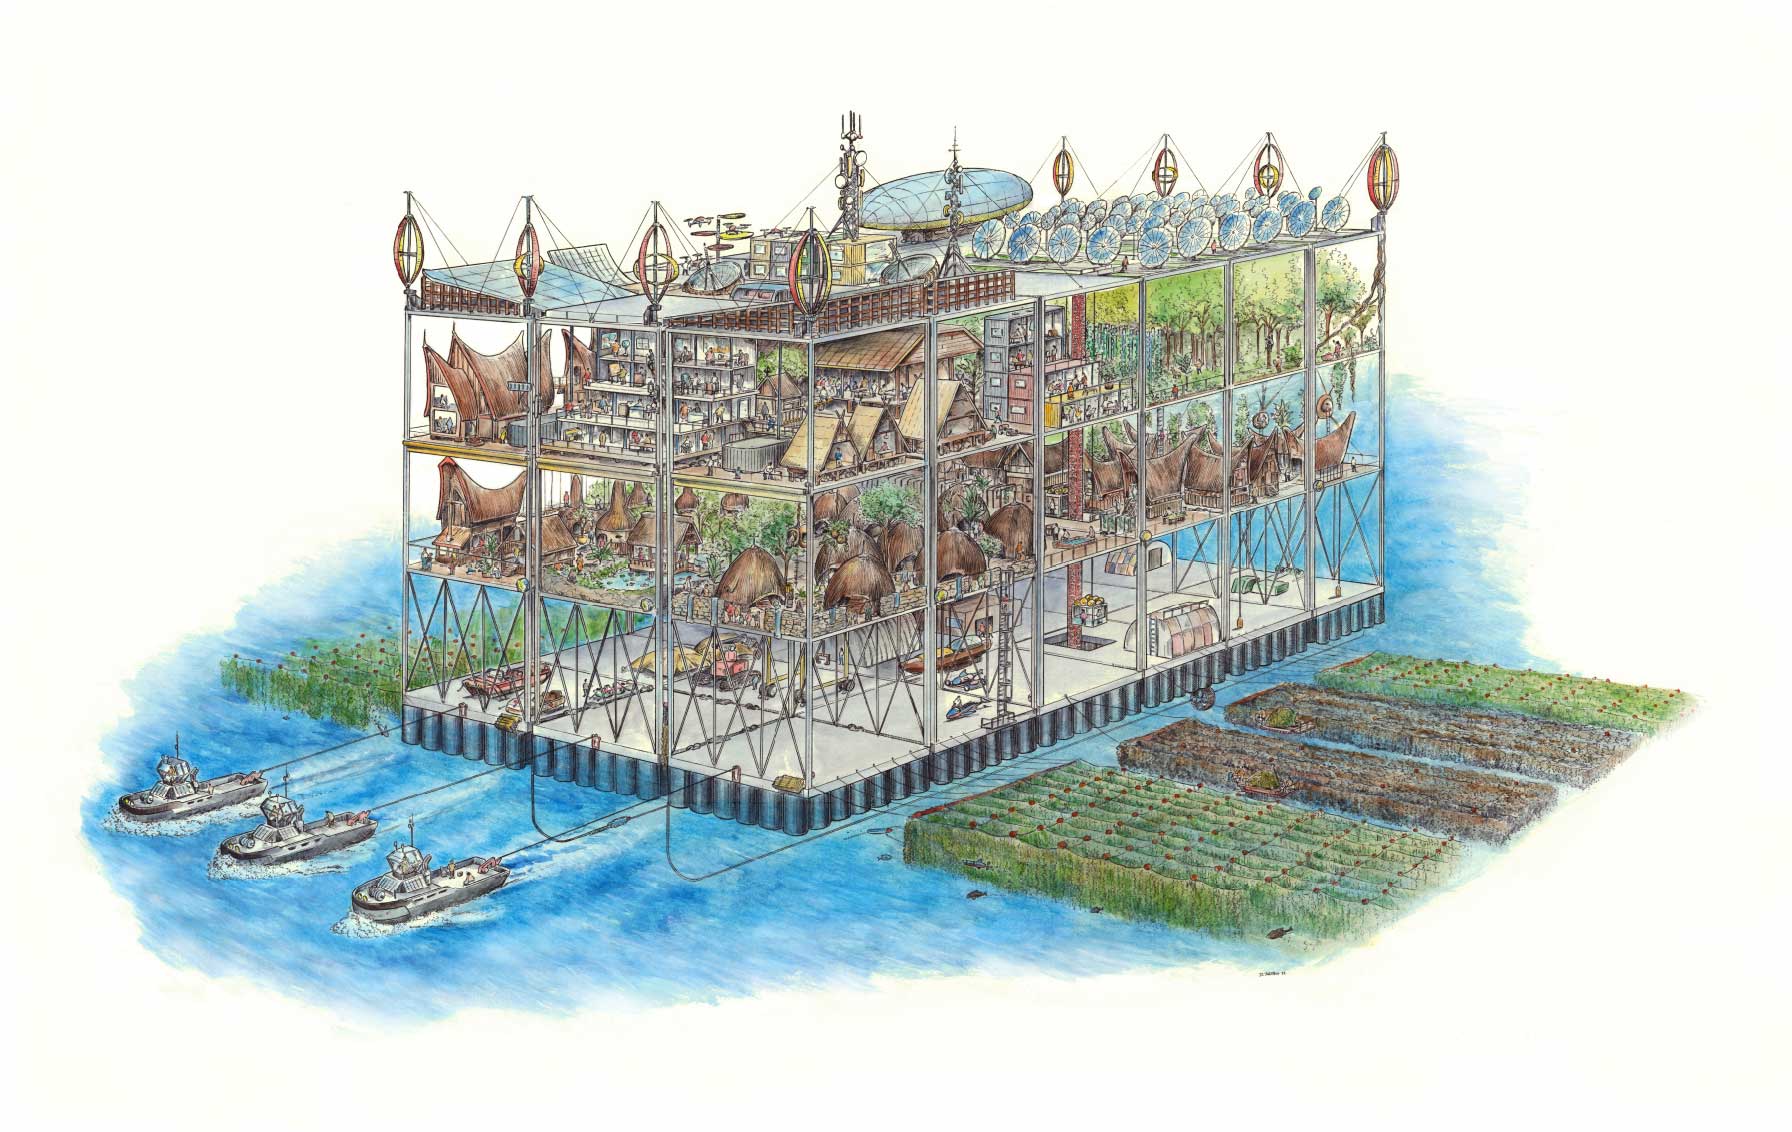 Watercolour painting depiciting a floating settlement - four wooden layers with different functions, with boats moored on the blue seas and marine gardens floating next door.